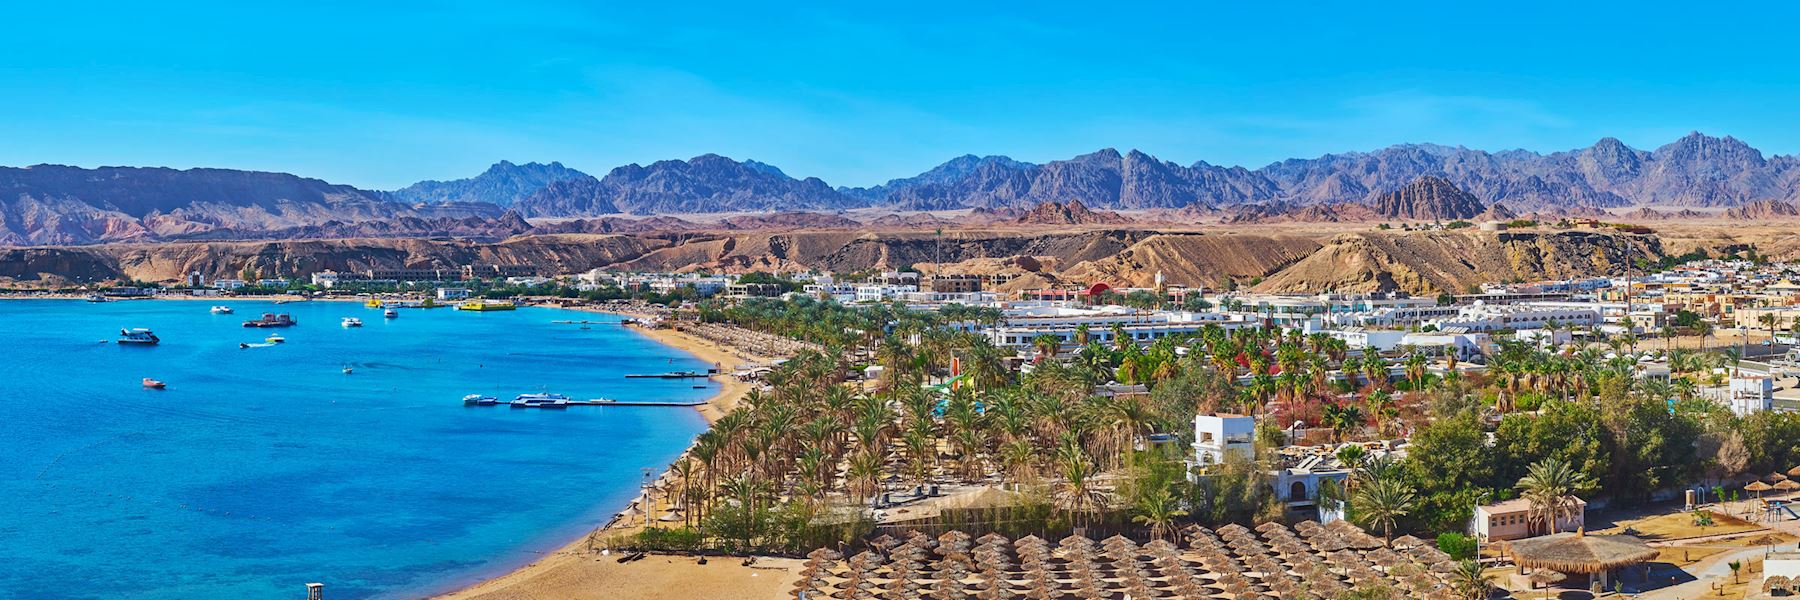 Visit The Red Sea on a trip to Egypt | Audley Travel